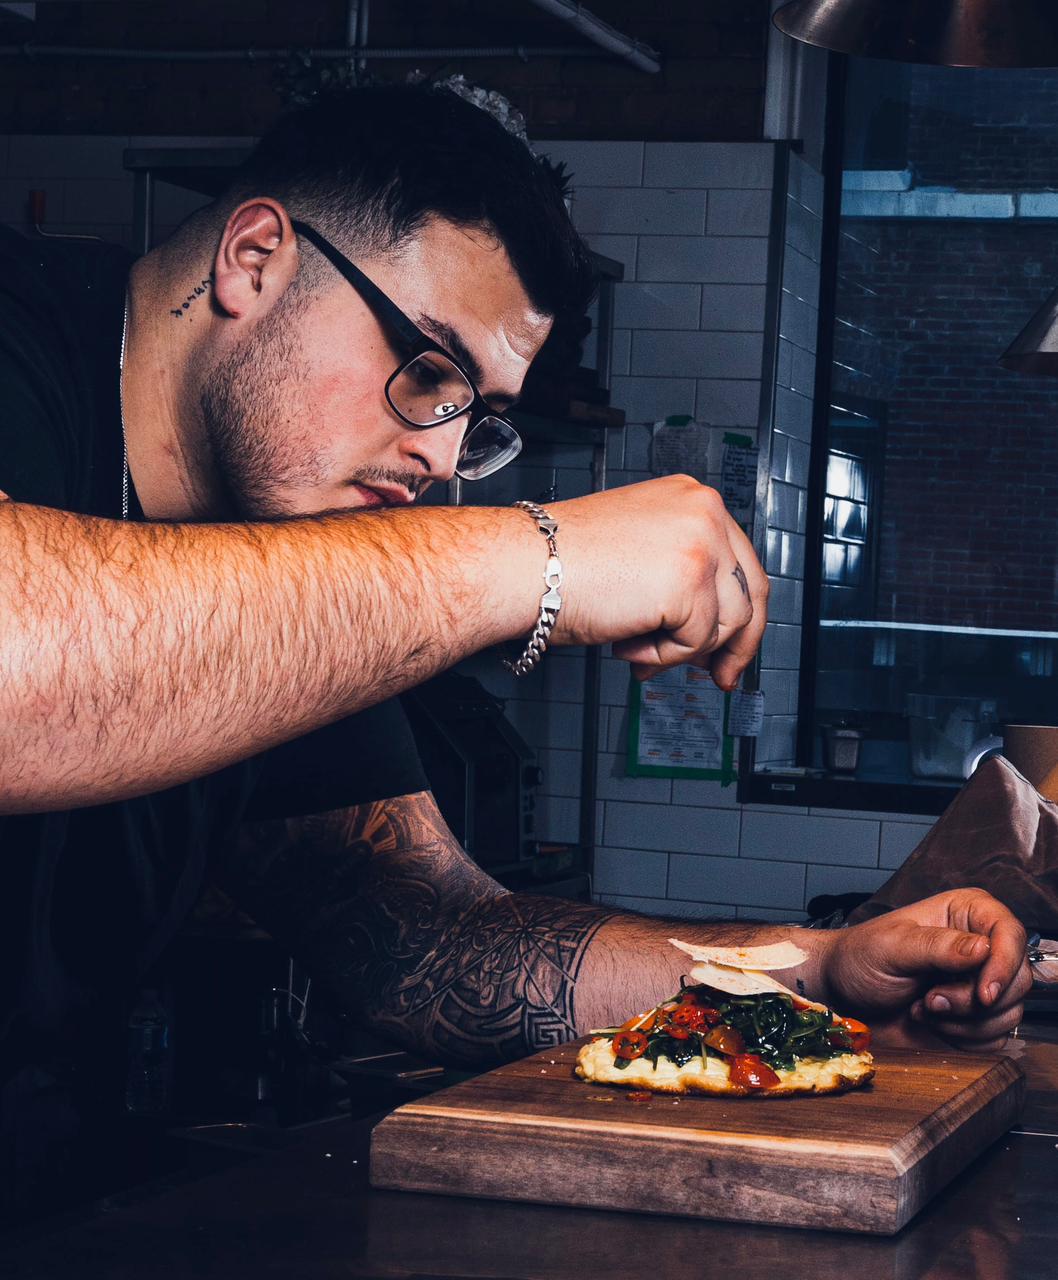 Rising Star Chef: Embracing the Culinary Journey of Albert Valentine, On his Anthony Bourdain-inspired journey